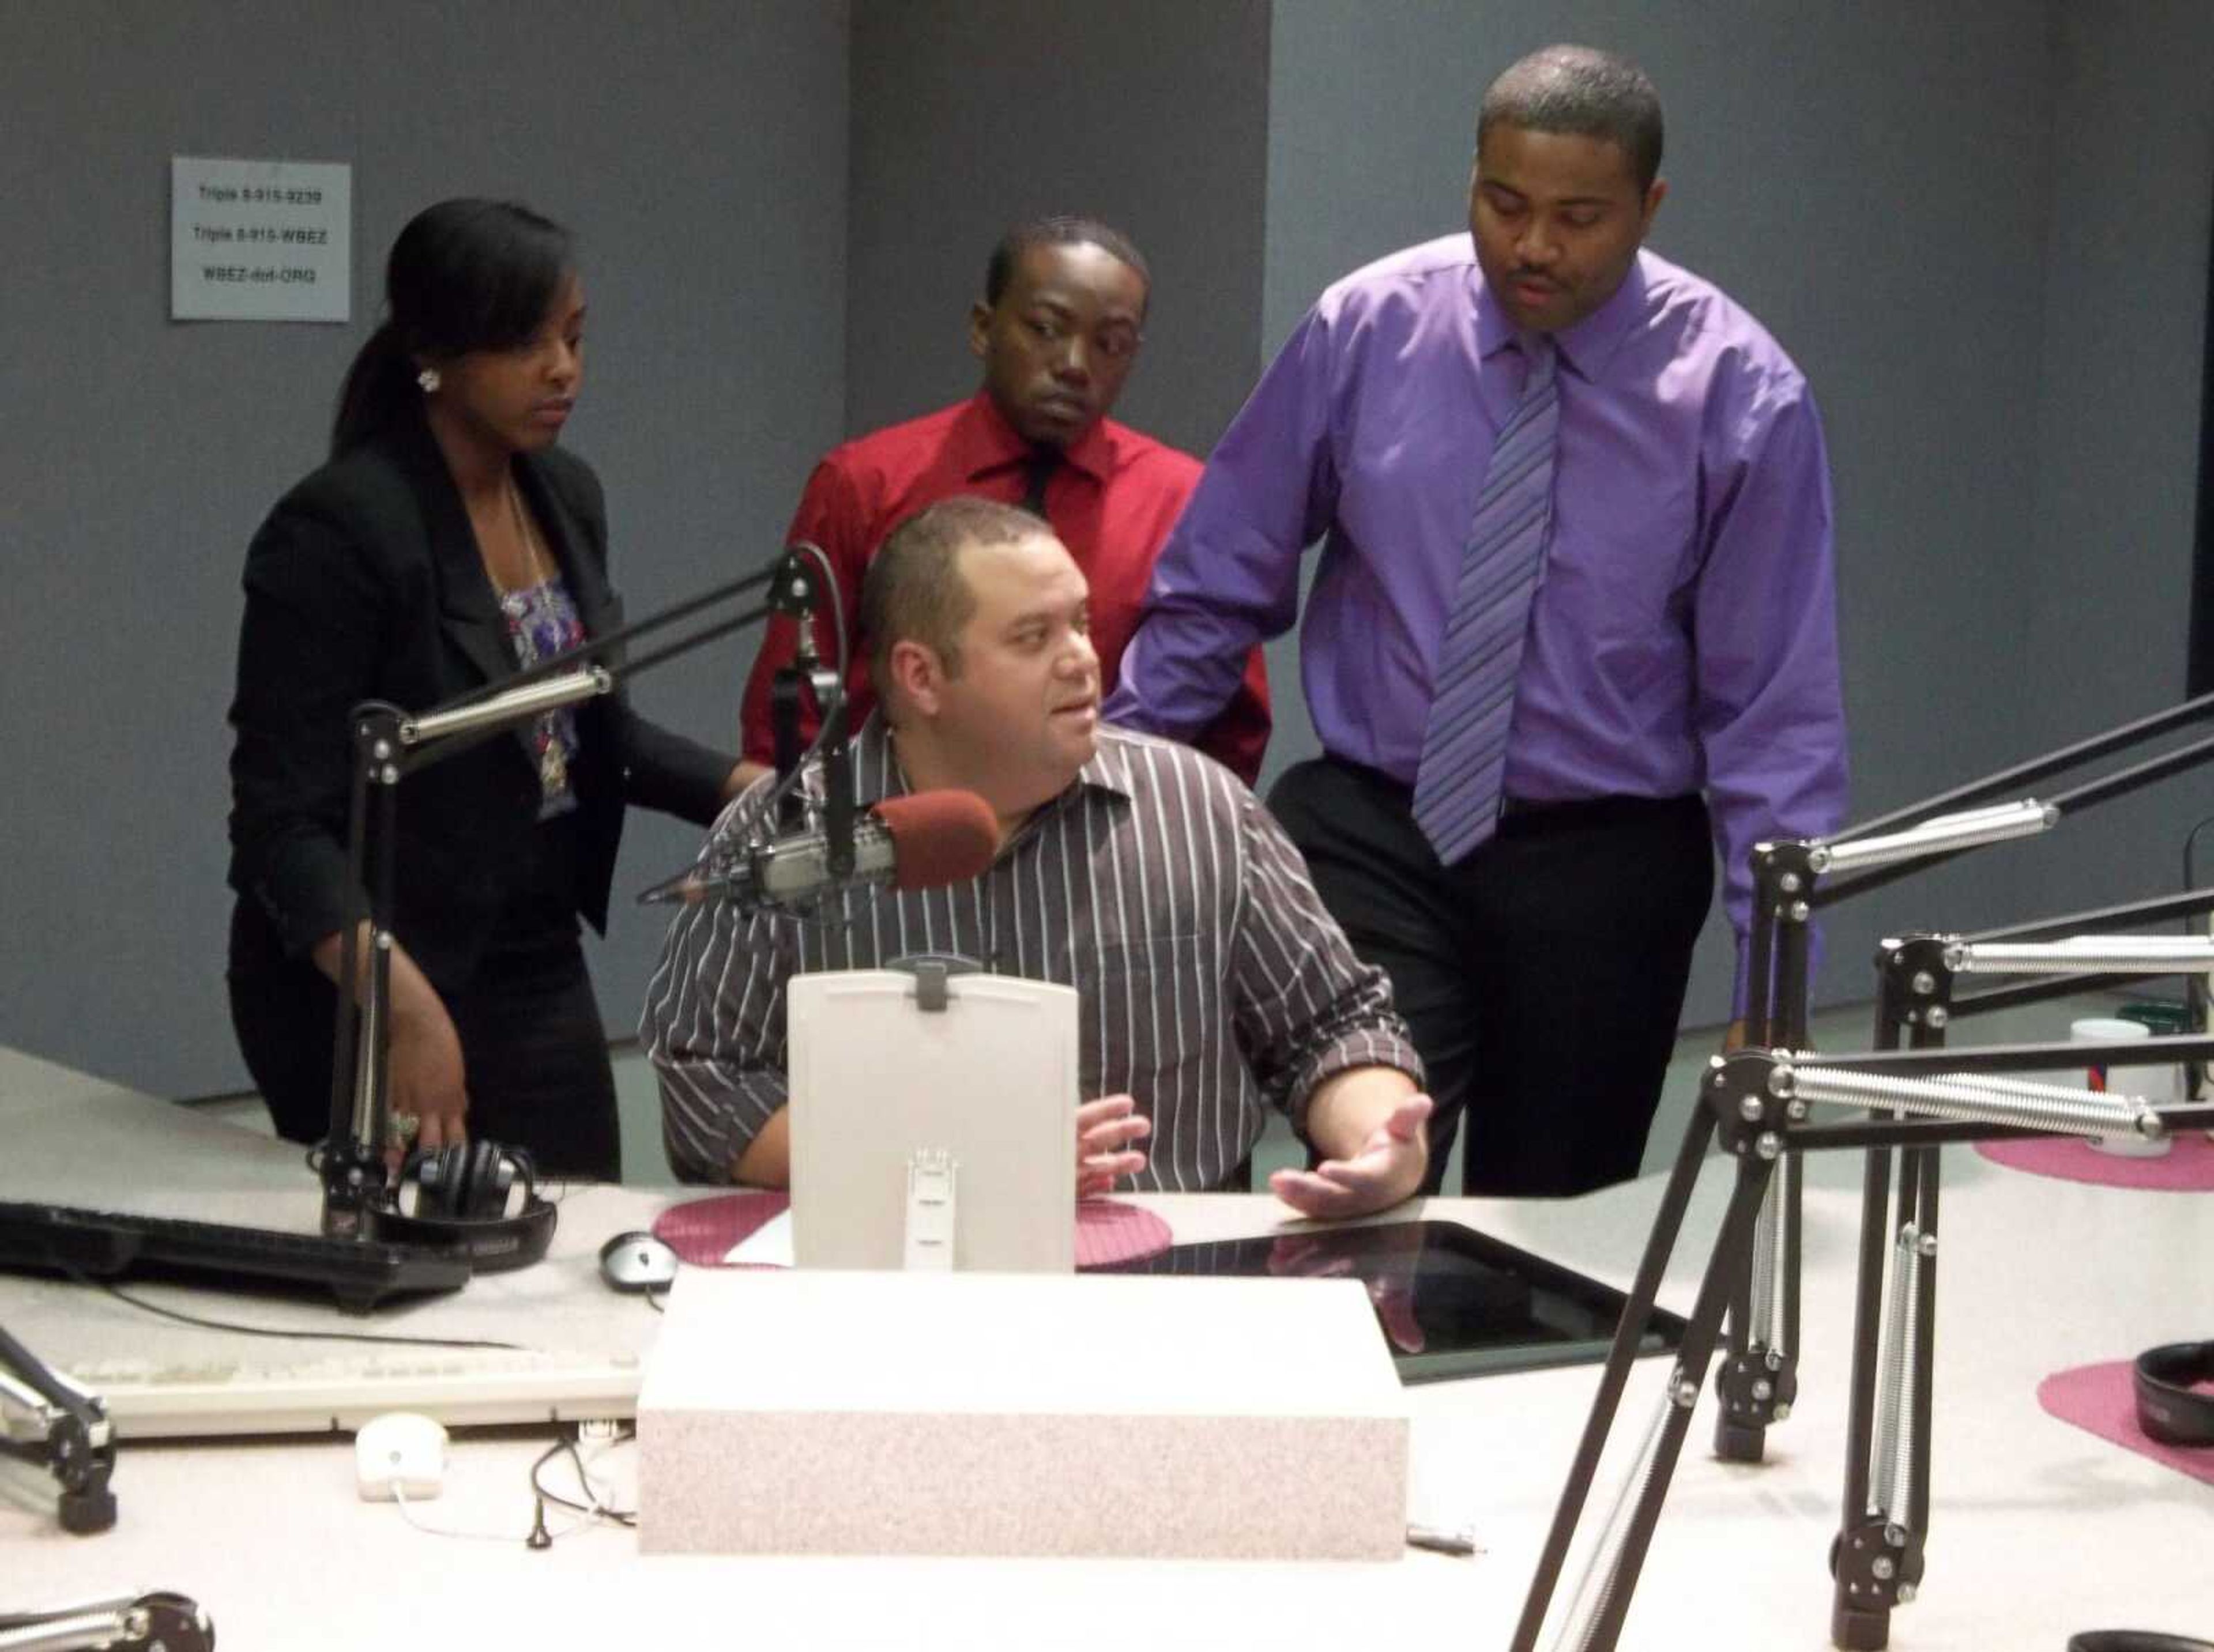 NABJ students Casandra Lenoir (left), Reginald Whitted (middle) and Deon Fisher (right), visited a local Chicago radio station on their trip.